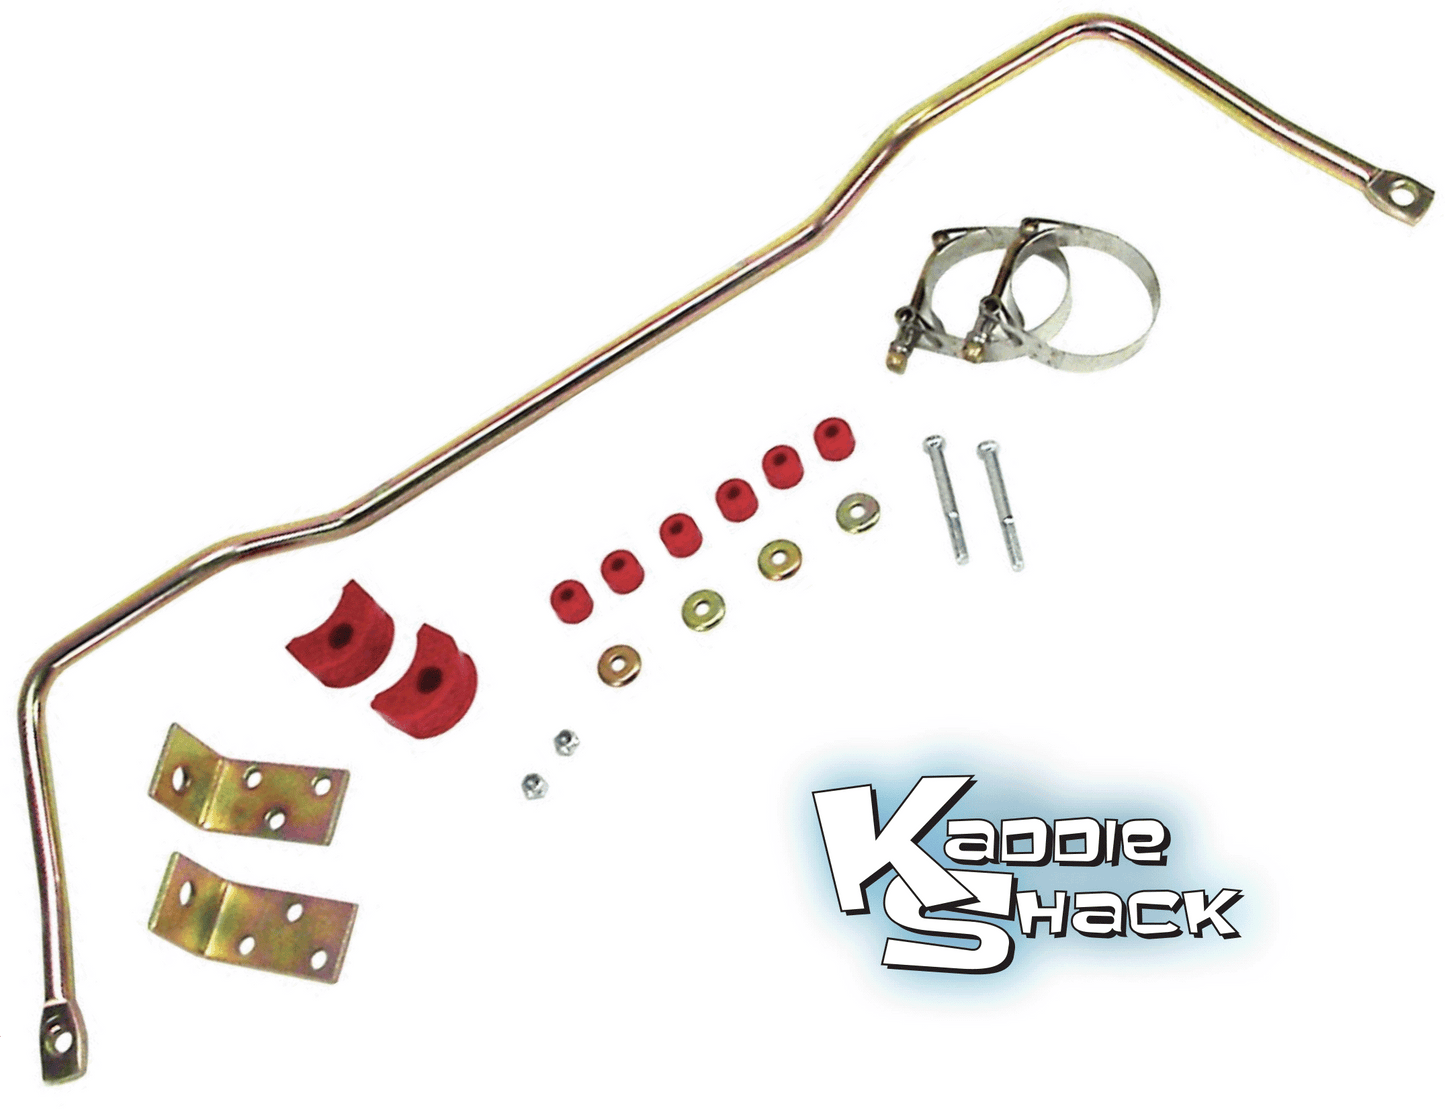 3/4" REAR PERFORMANCE Sway Bar for IRS, '69 & up